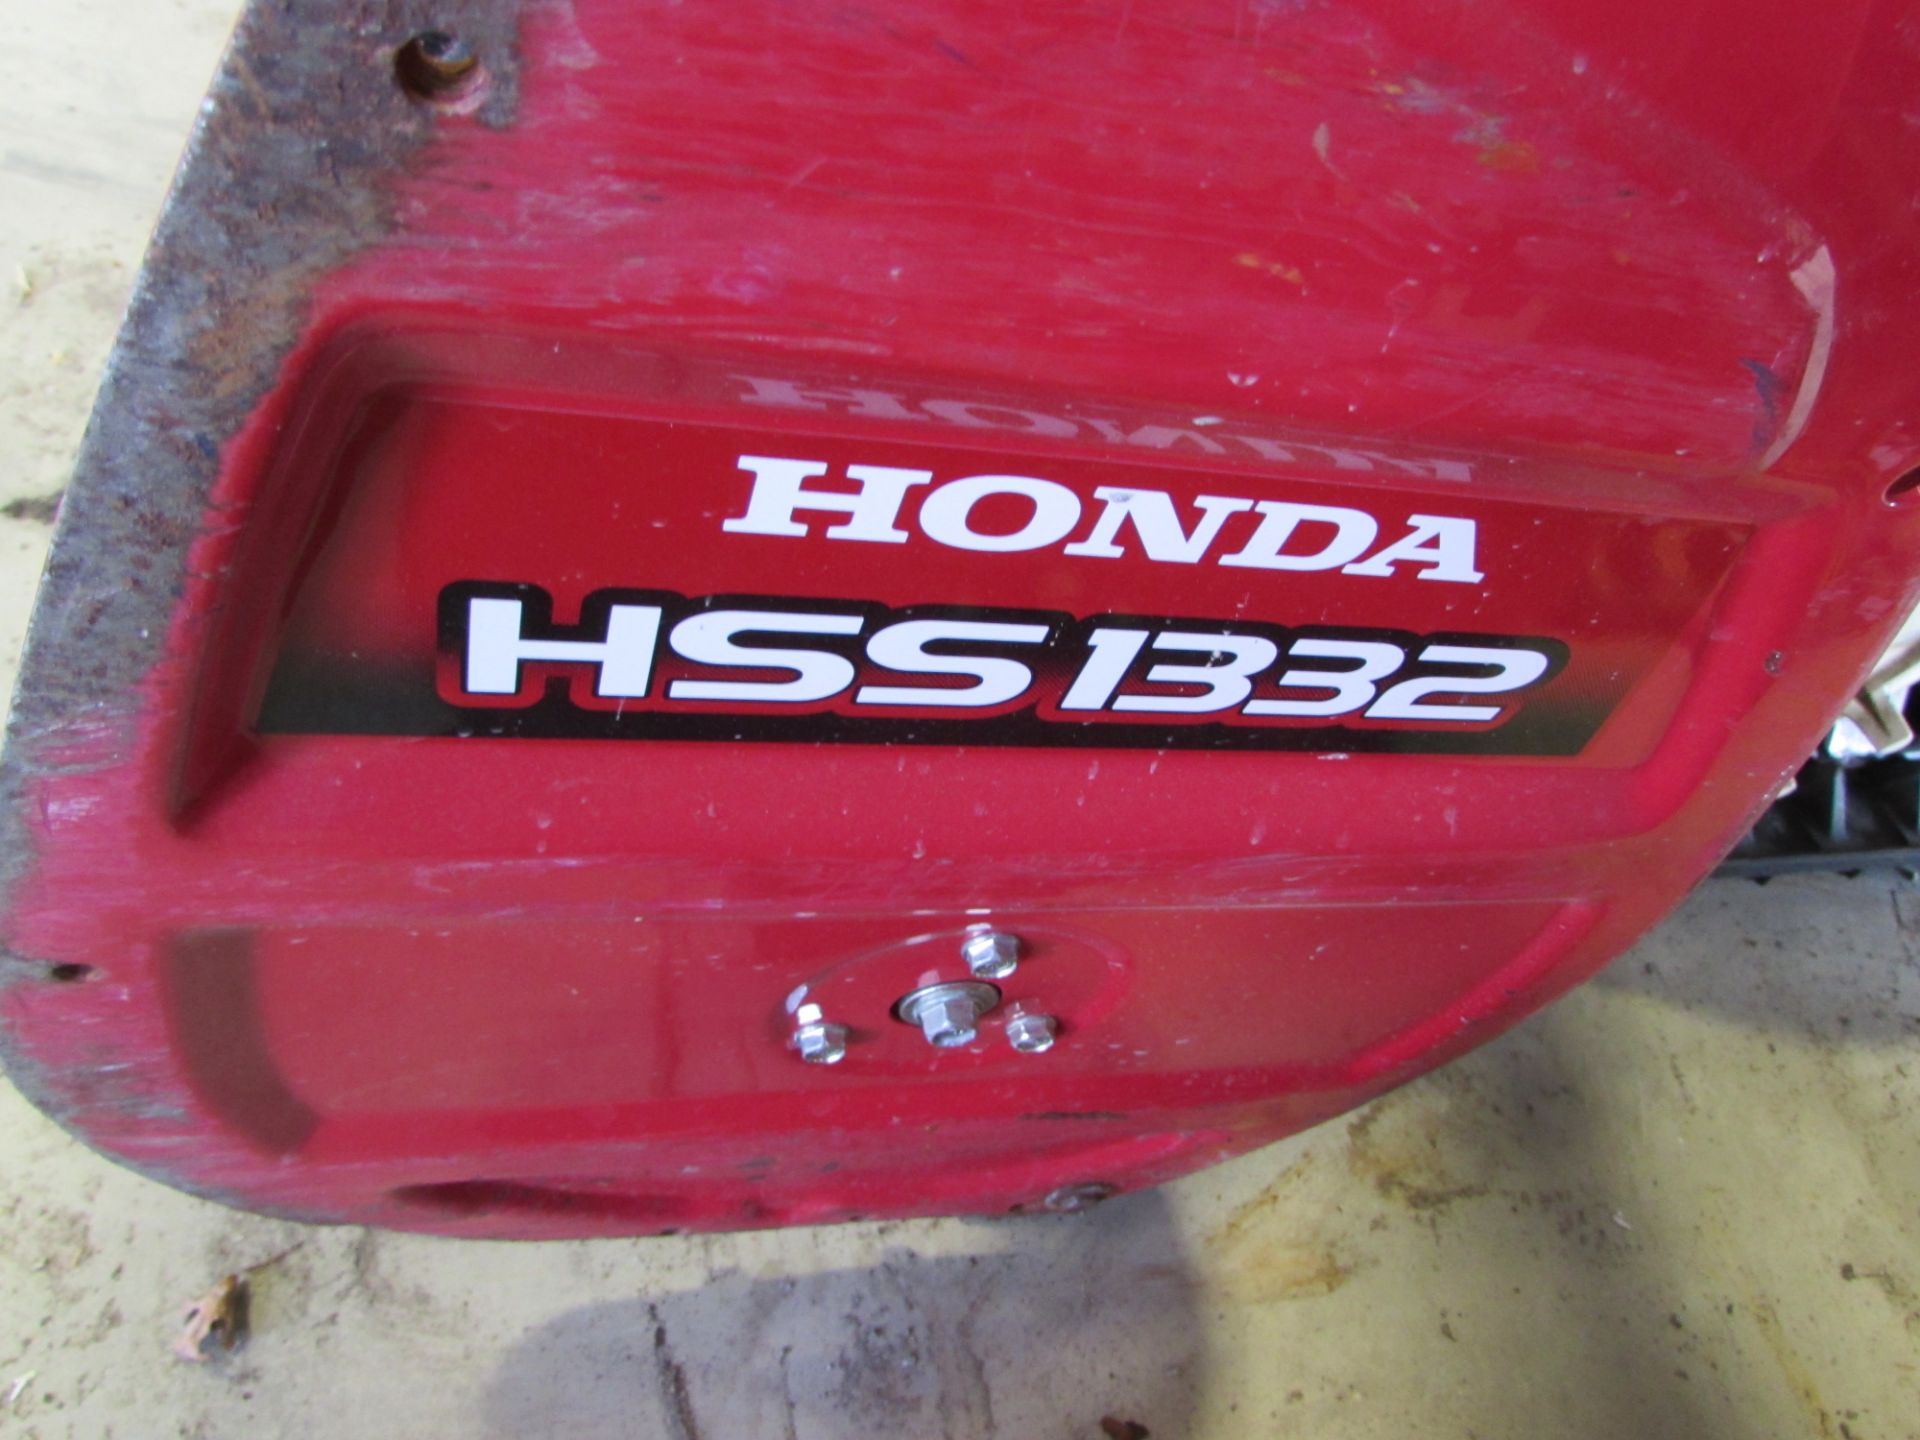 2012 HONDA HSS1332 TRACK SNOWBLOWER C/W 31.9" CLEARING WIDTH, 21.7" CLEARING HEIGHT, 198 DEGREE - Image 2 of 2